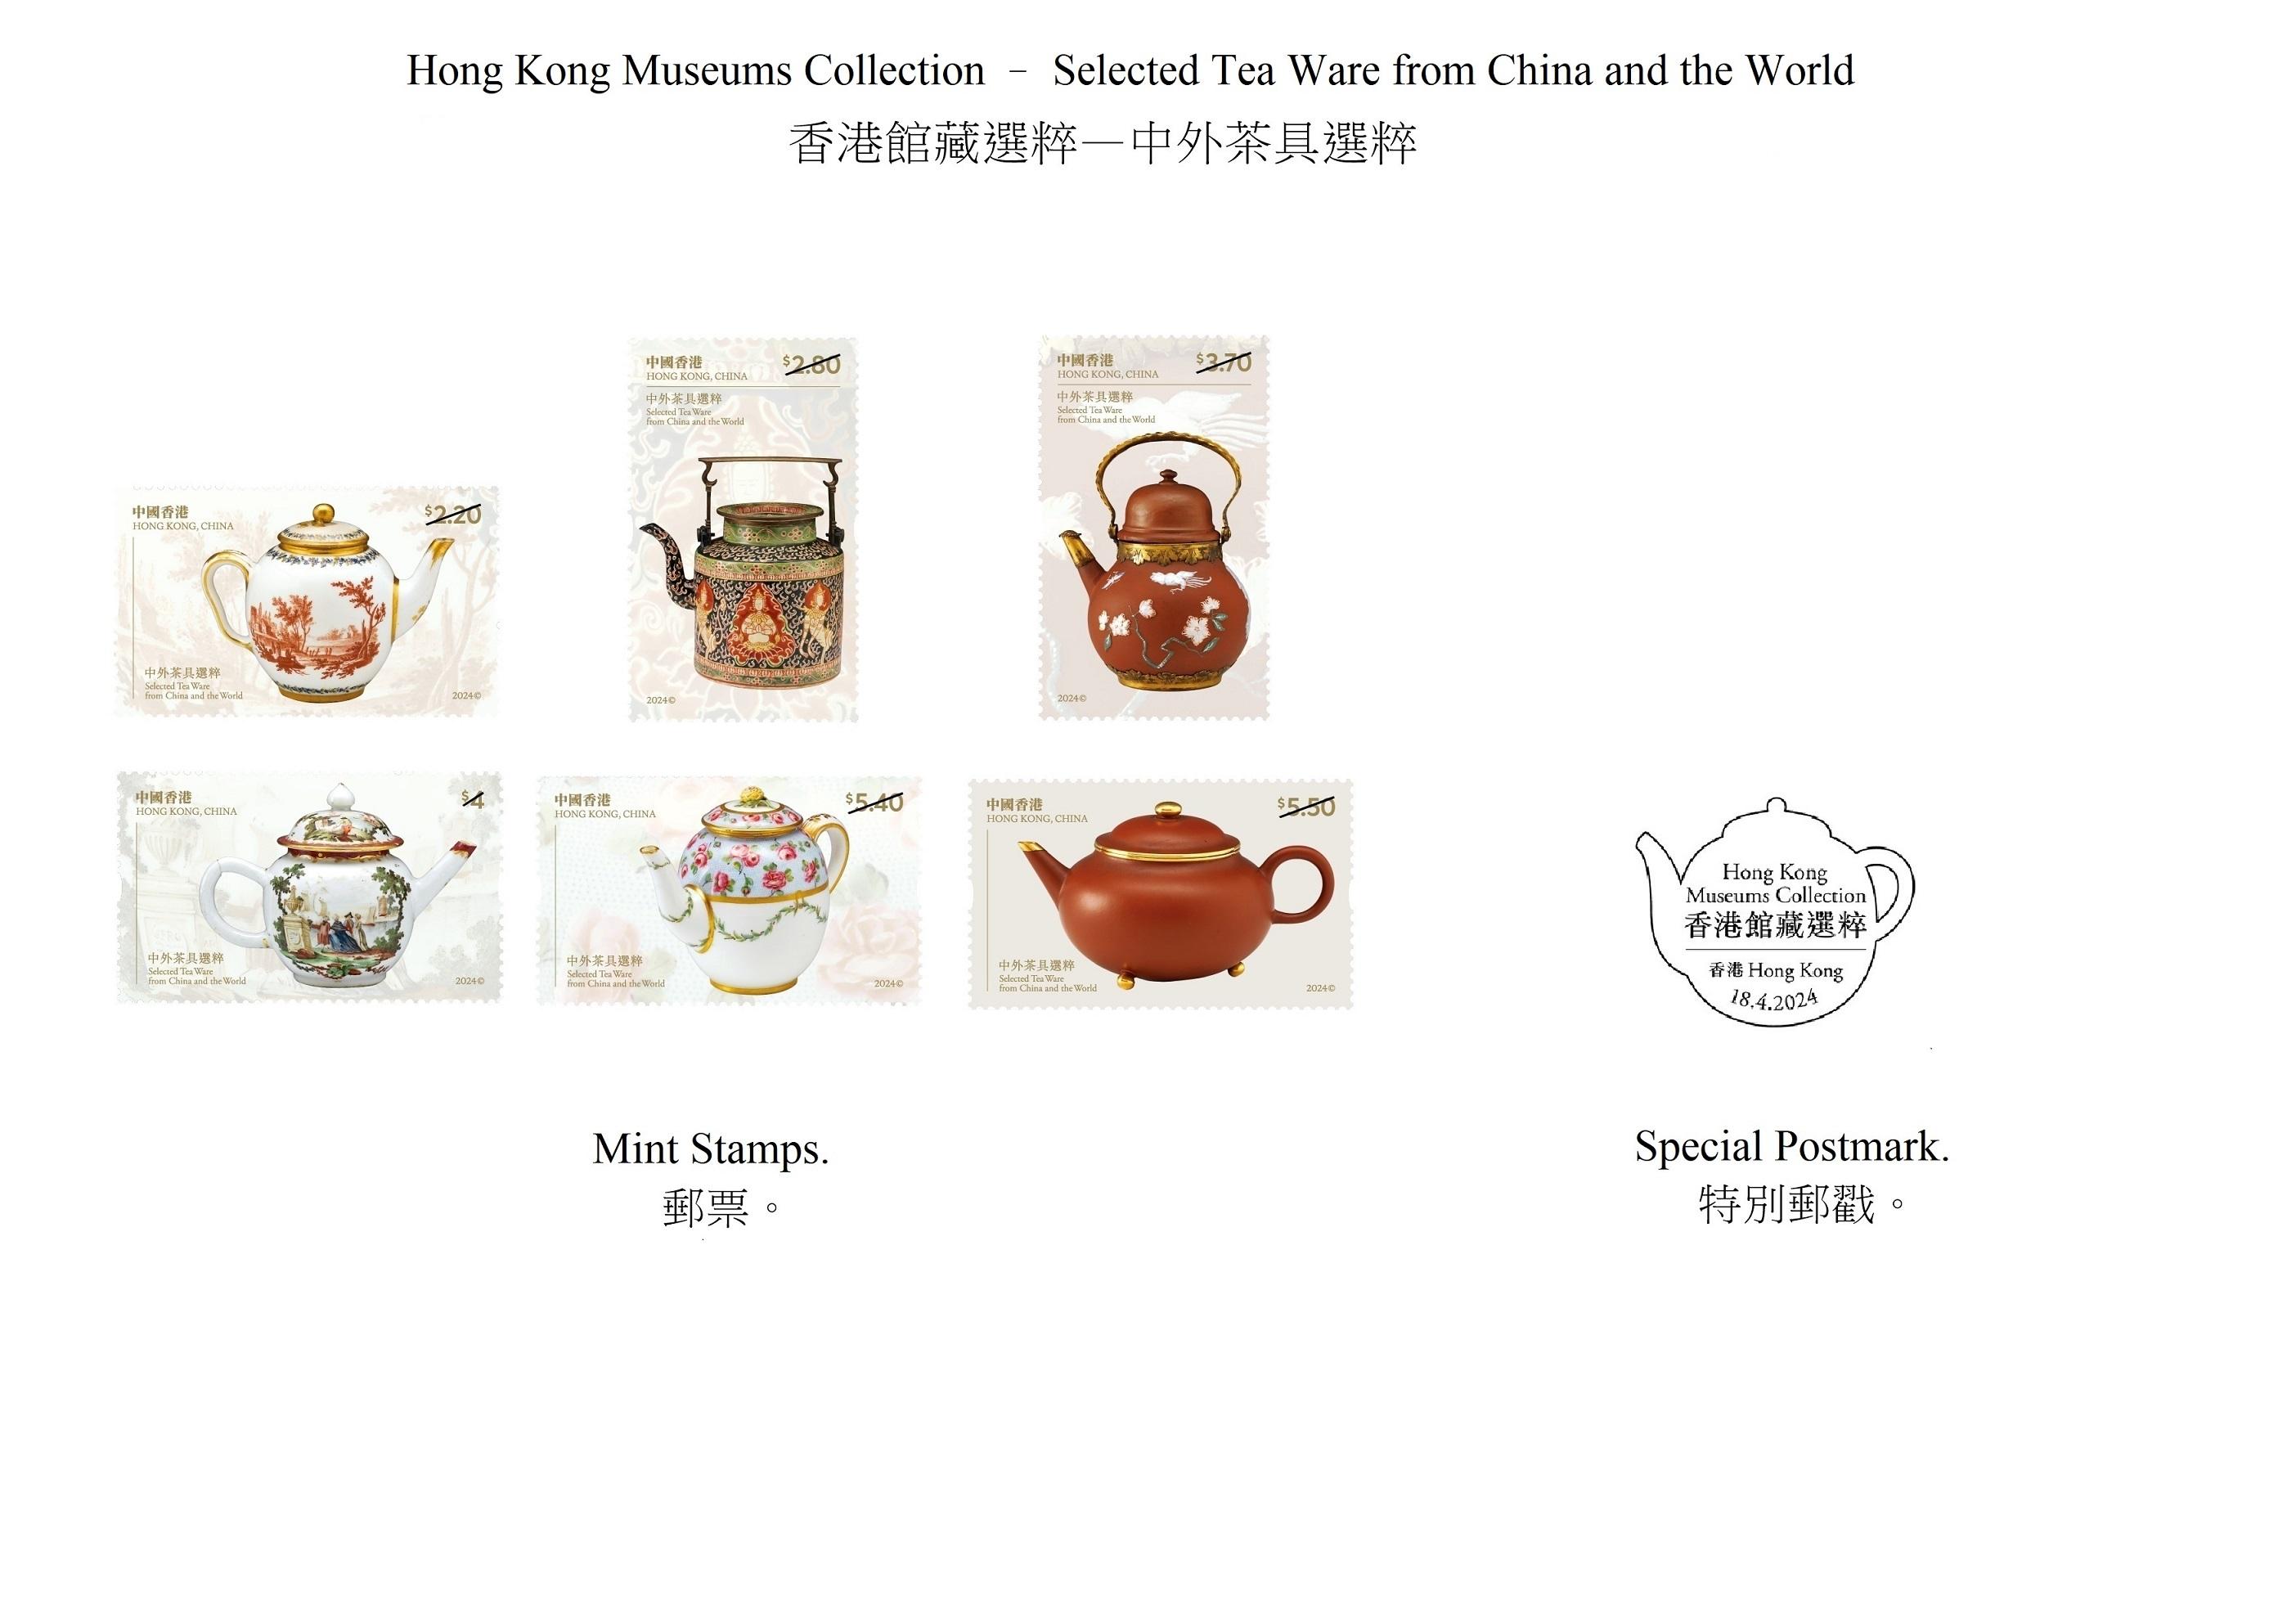 Hongkong Post will launch a special stamp issue and associated philatelic products on the theme of "Hong Kong Museums Collection - Selected Tea Ware from China and the World" on April 18 (Thursday). Photos show the mint stamps and the special postmark.
